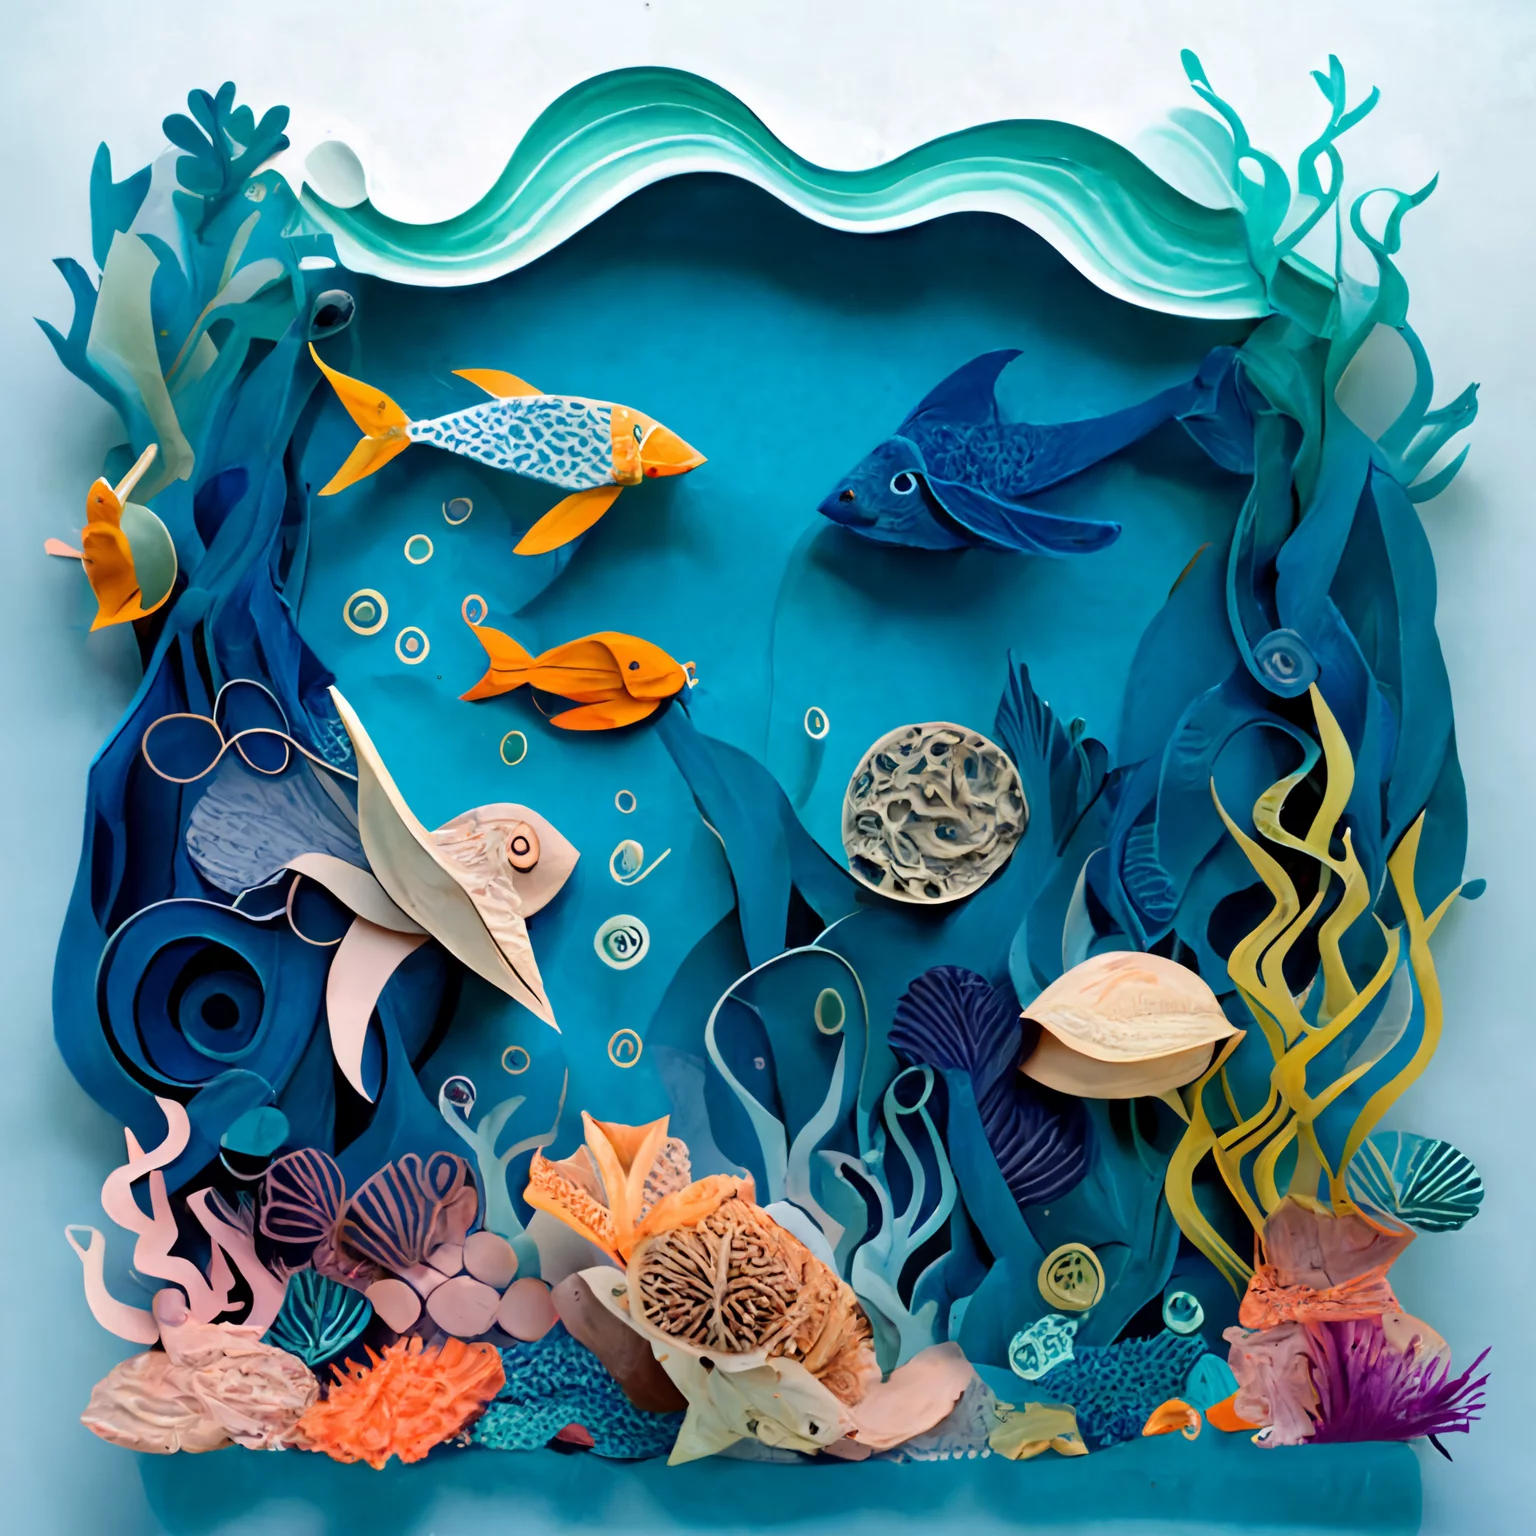 Surreal Ocean Landscape – Vibrant Intricate Layered